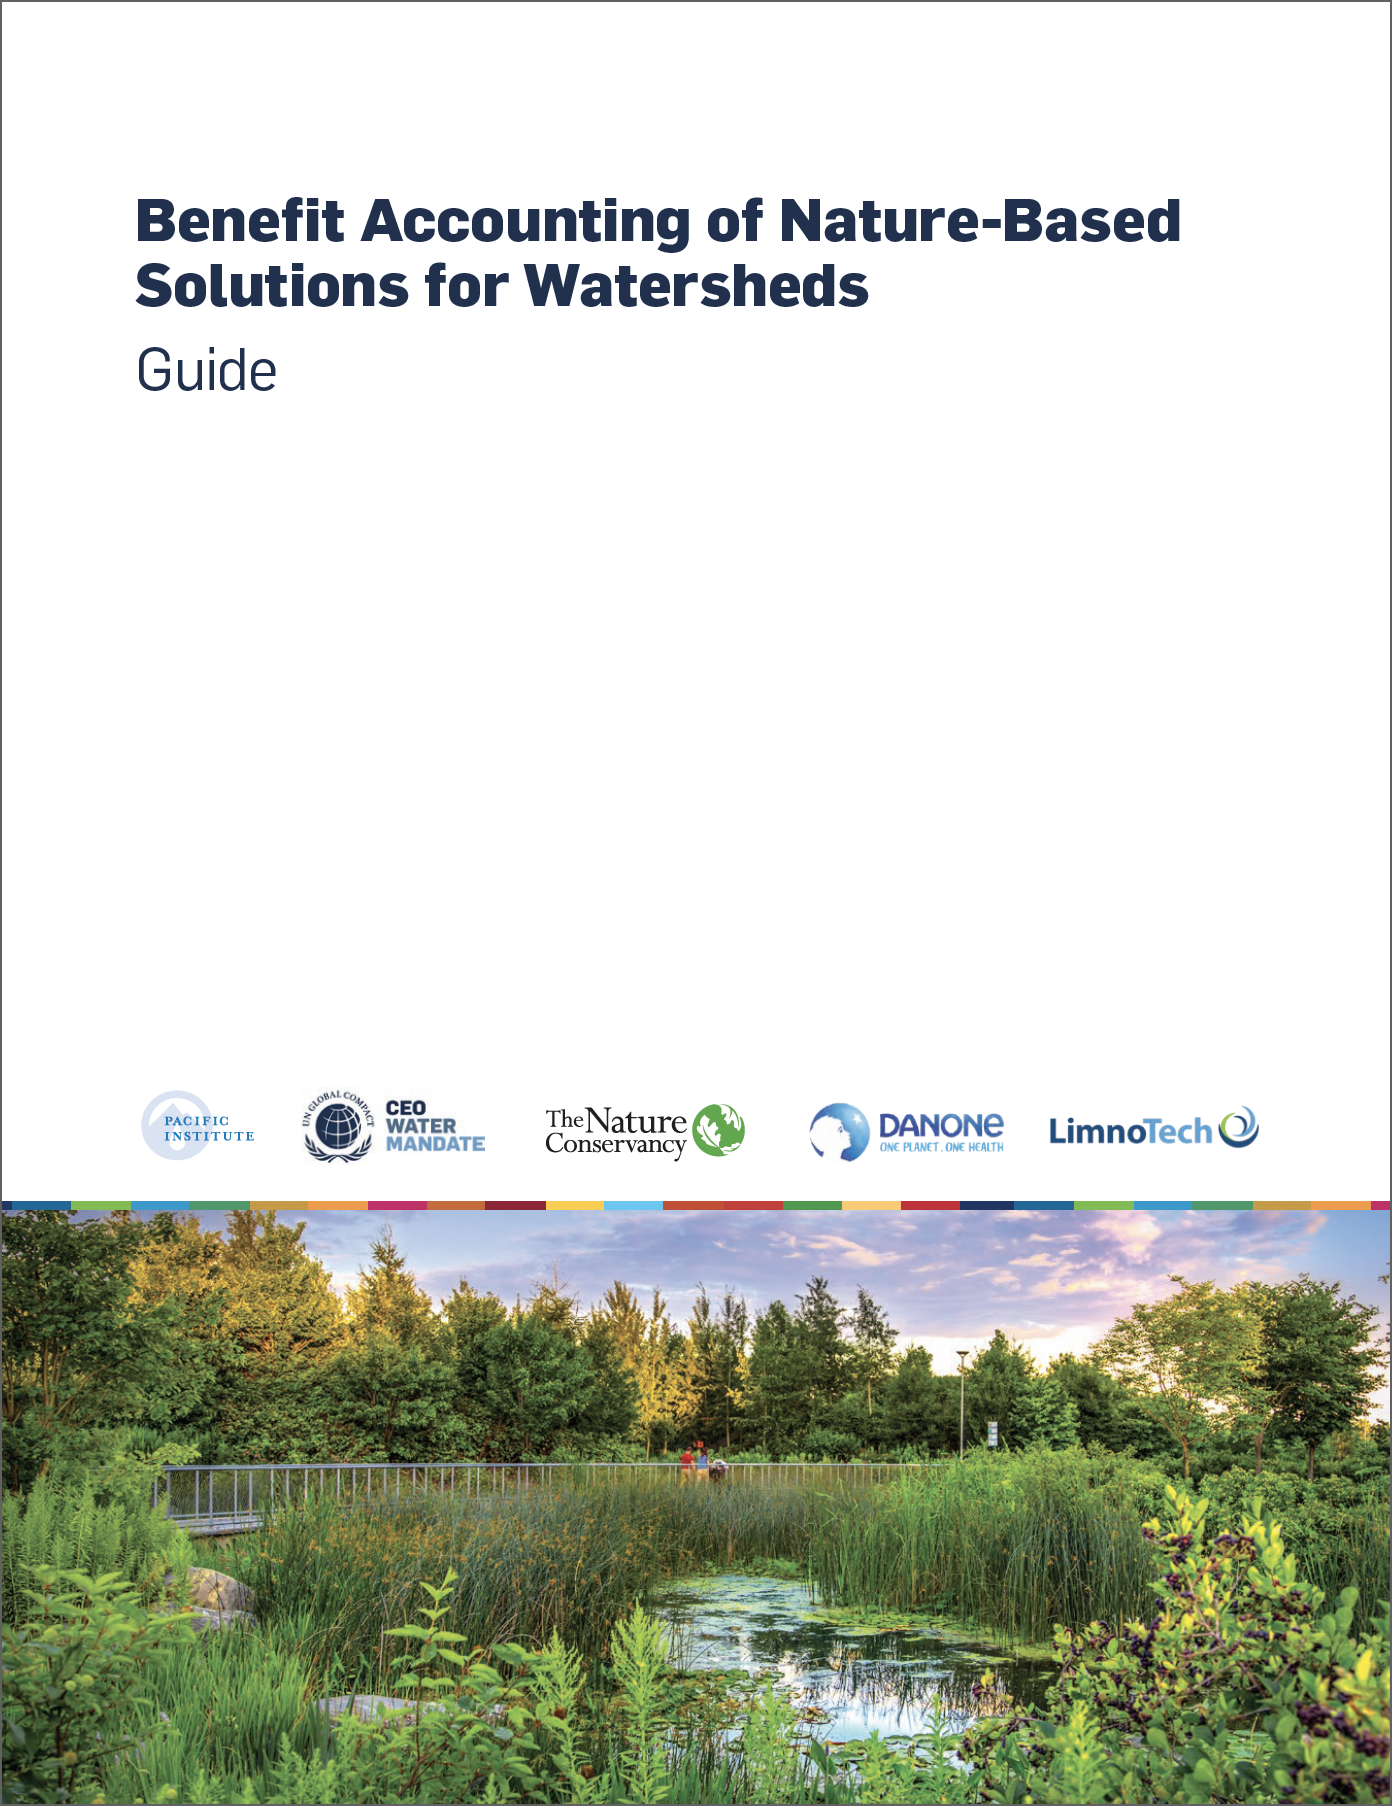 Benefit Accounting of Nature-Based Solutions for Watersheds